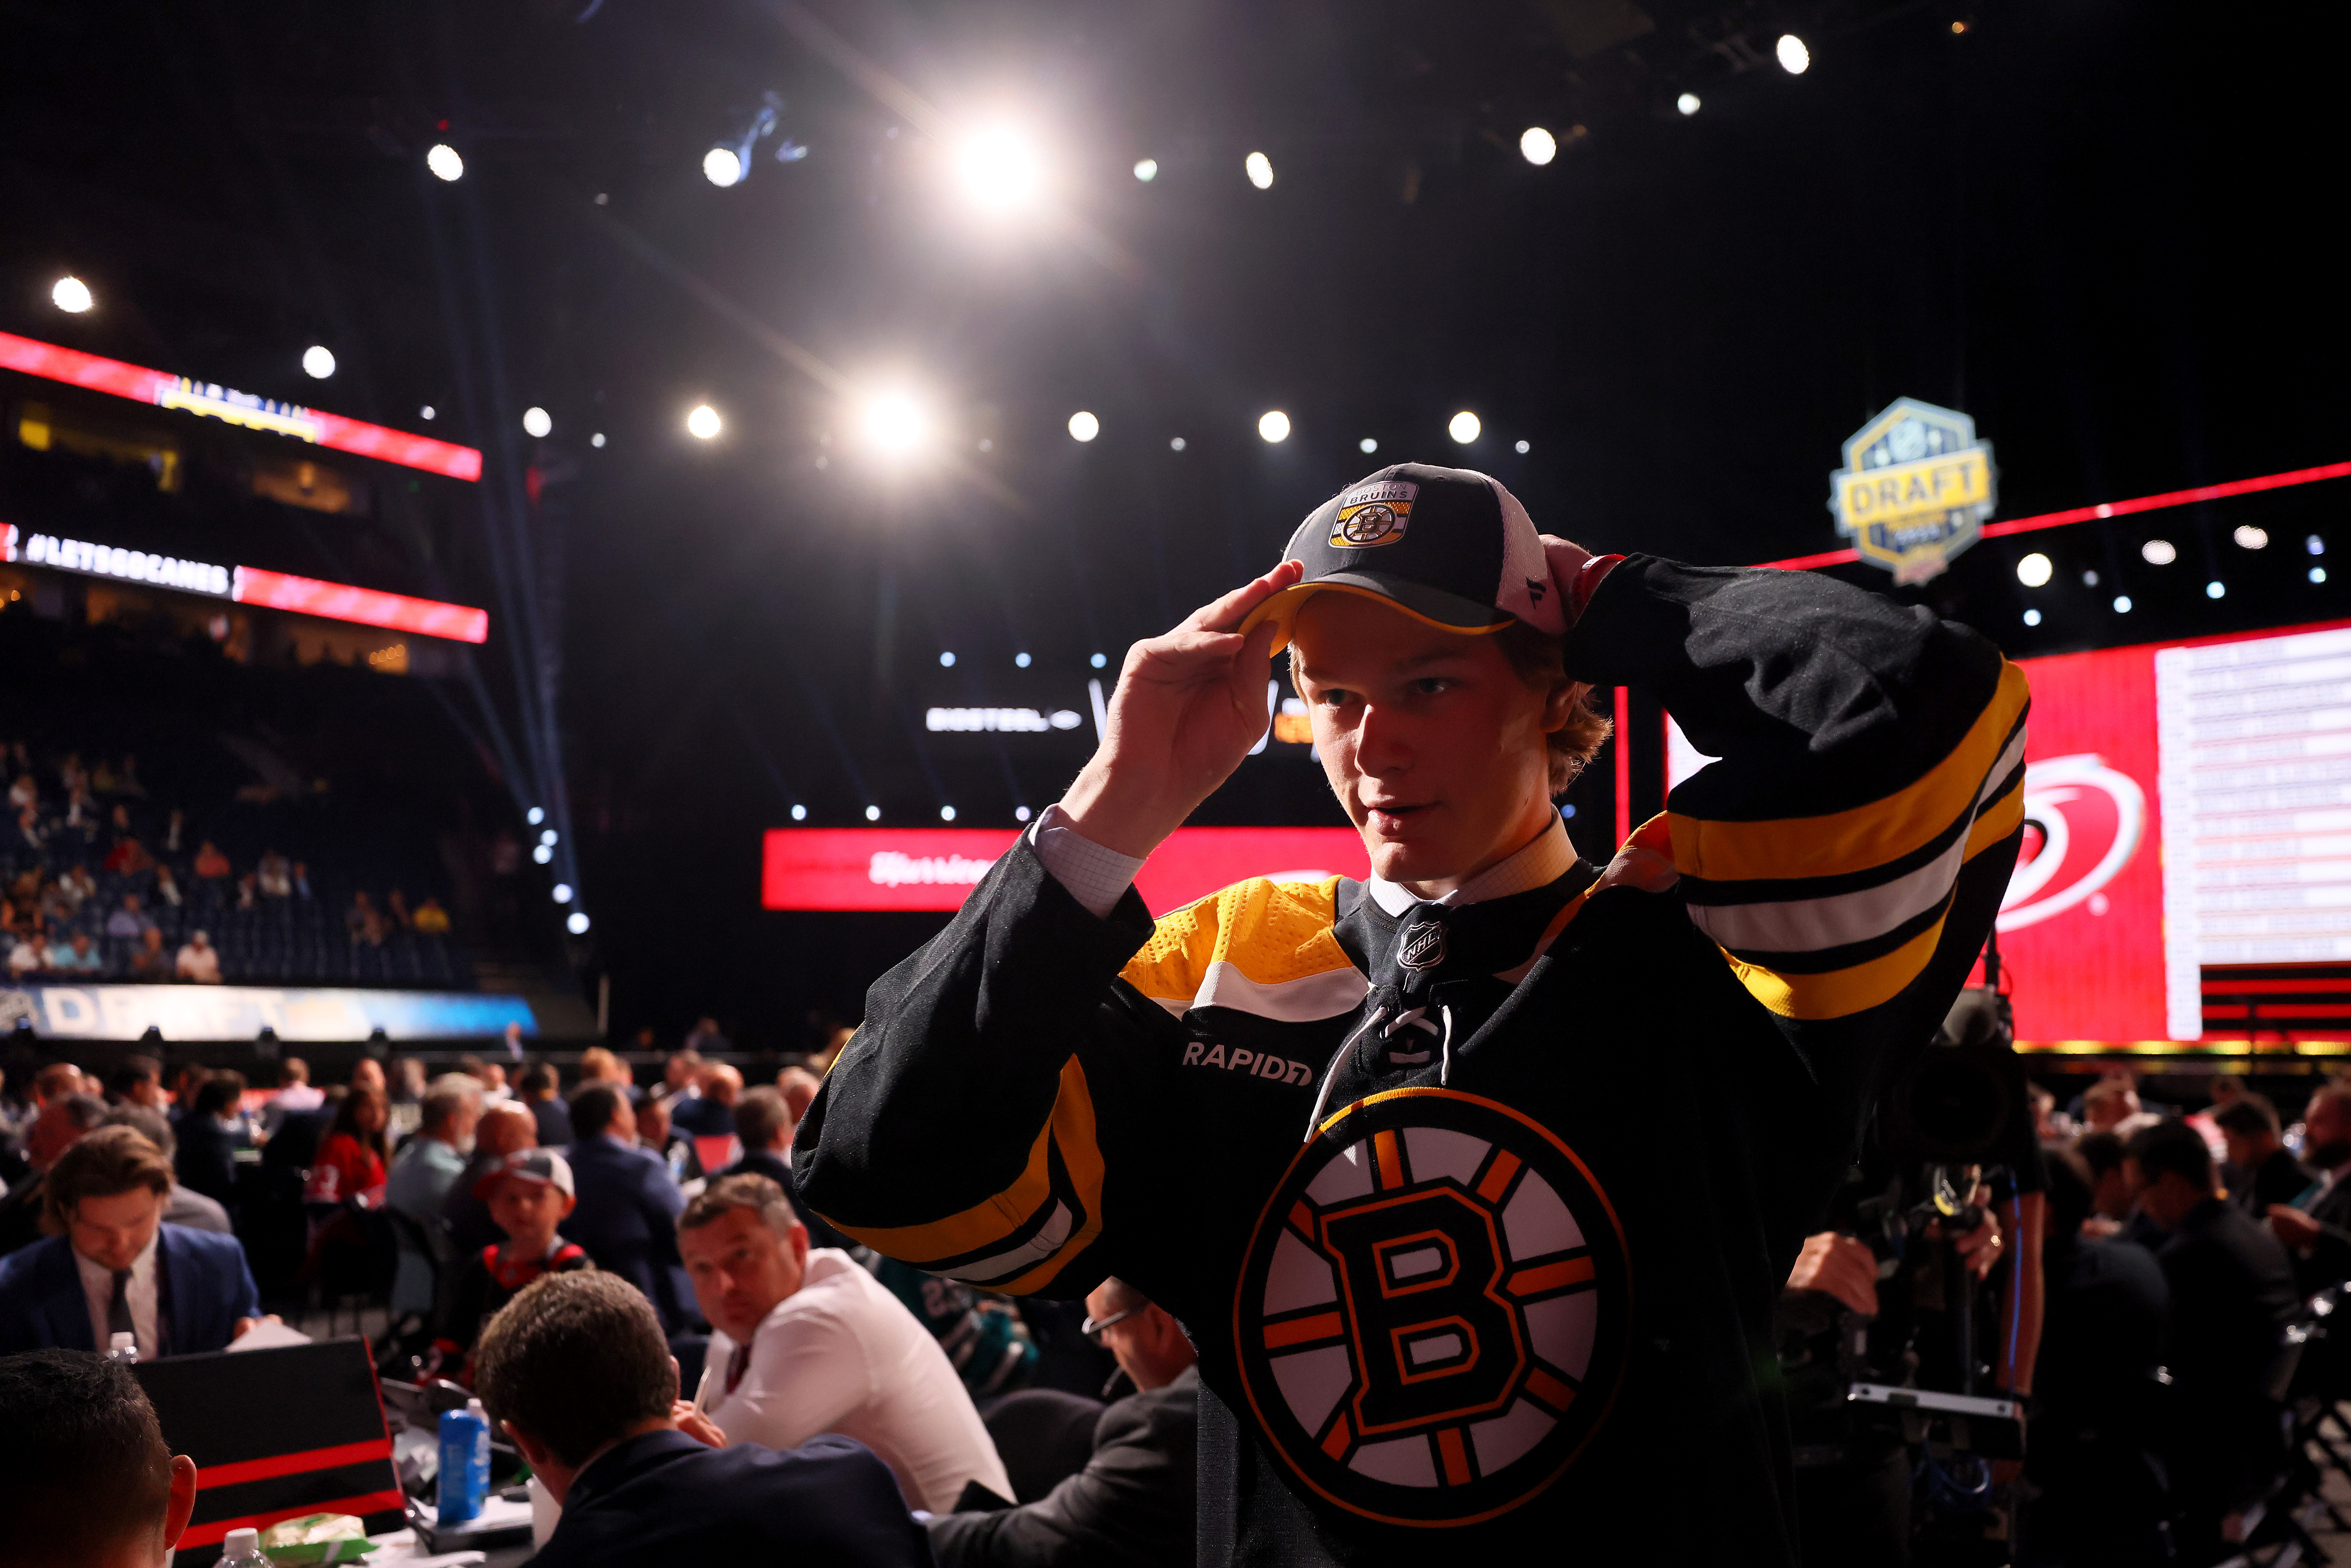 NHL Draft 2022 hats available to buy now for all 32 teams (photos